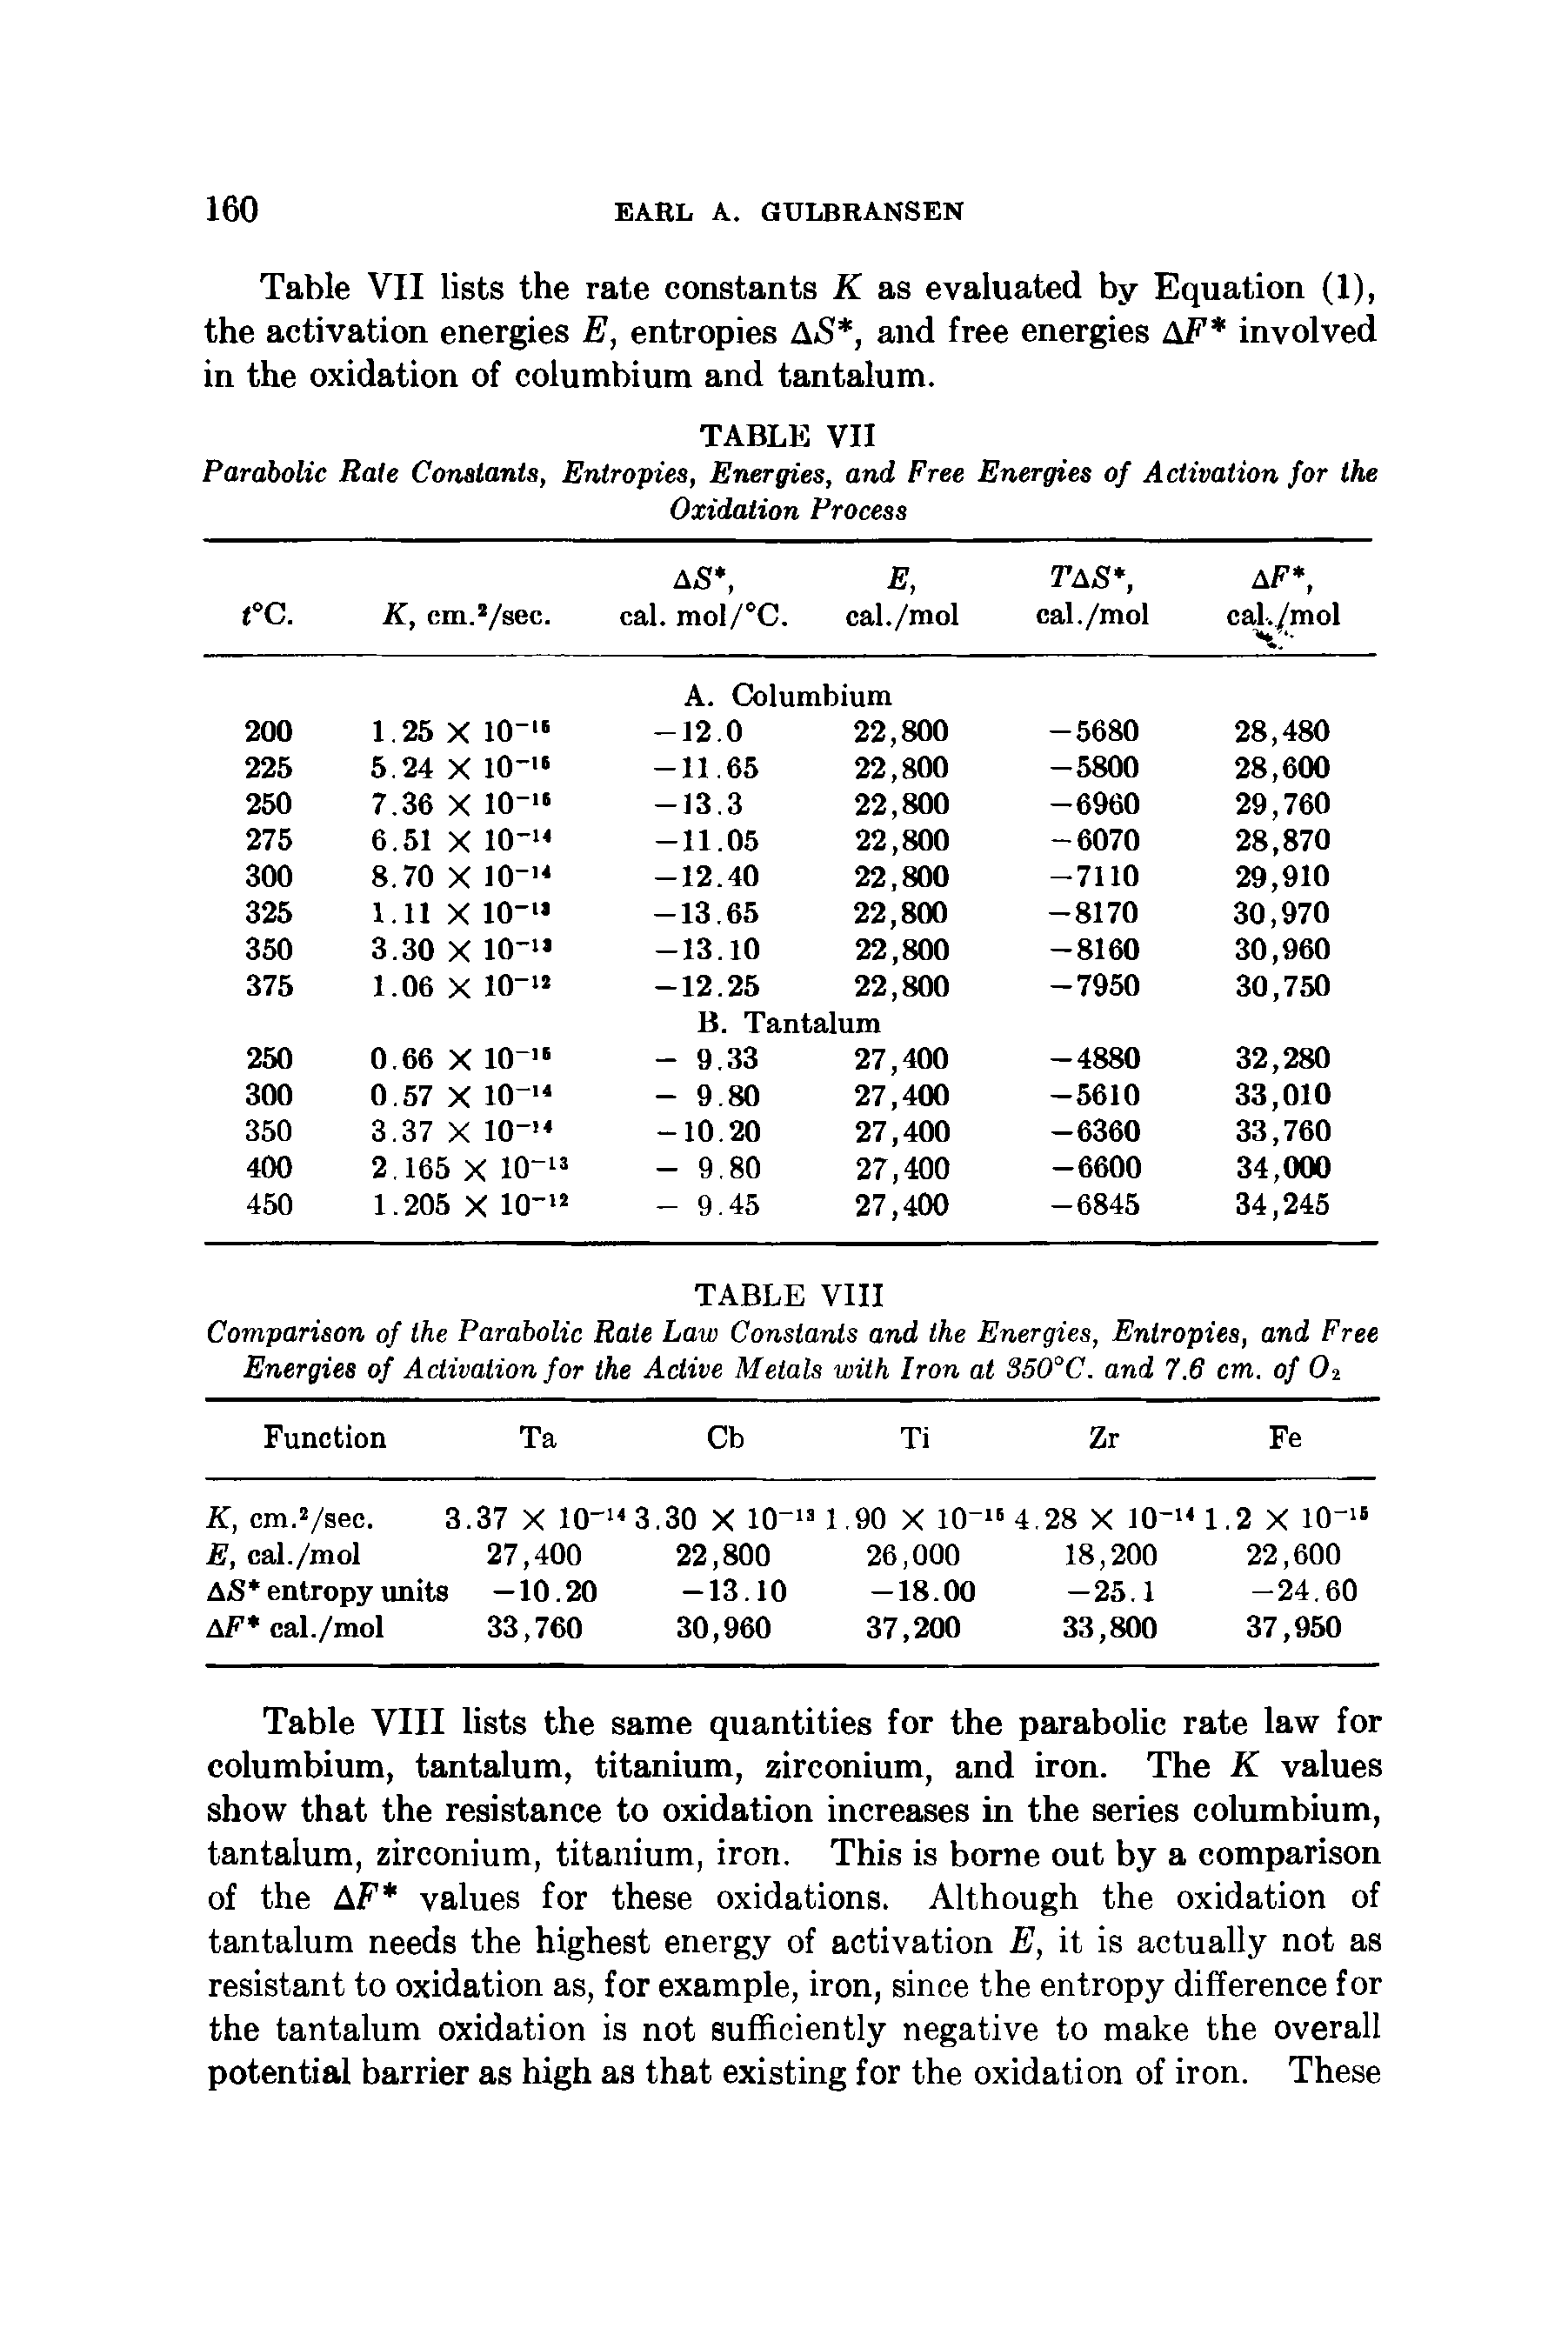 Table VII lists the rate constants K as evaluated by Equation (1), the activation energies E, entropies AS, and free energies AF involved in the oxidation of columbium and tantalum.